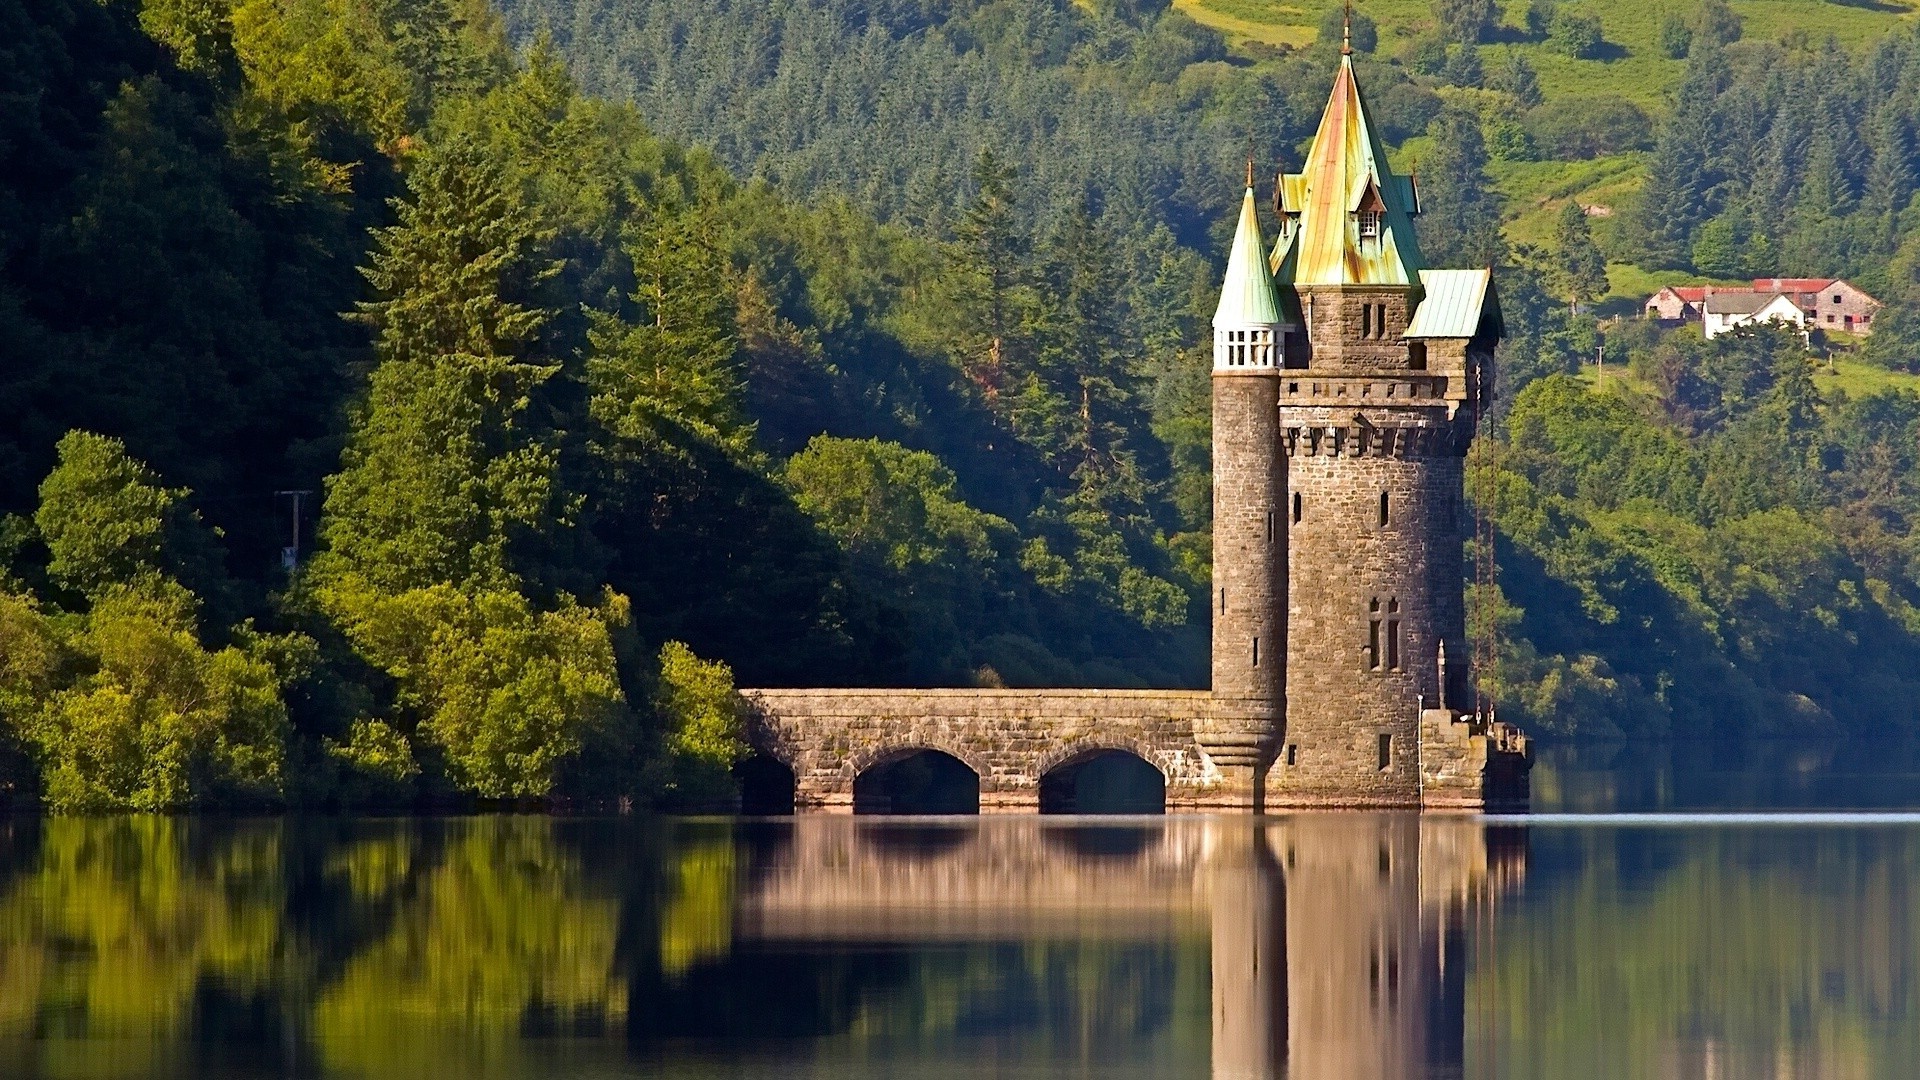 nature, Landscape, Architecture, UK, Hill, Sky, Clouds, Trees, Forest, Vyrnwy Tower, Wales, Castle, Bridge, House, Water, Lake, Reflection, Ancient Wallpaper